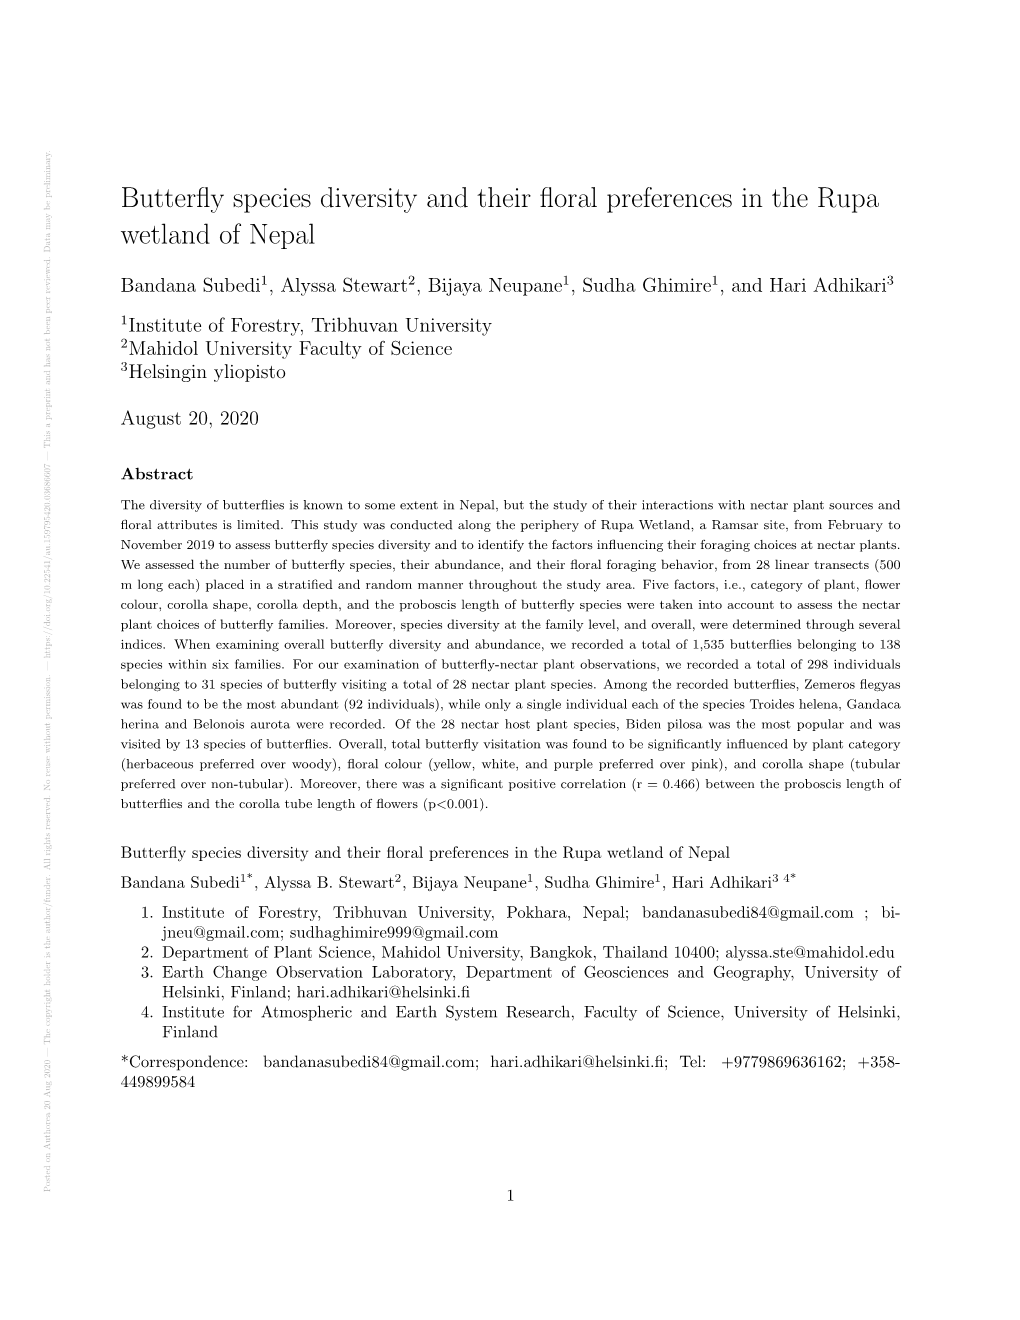 Butterfly Species Diversity and Their Floral Preferences in The